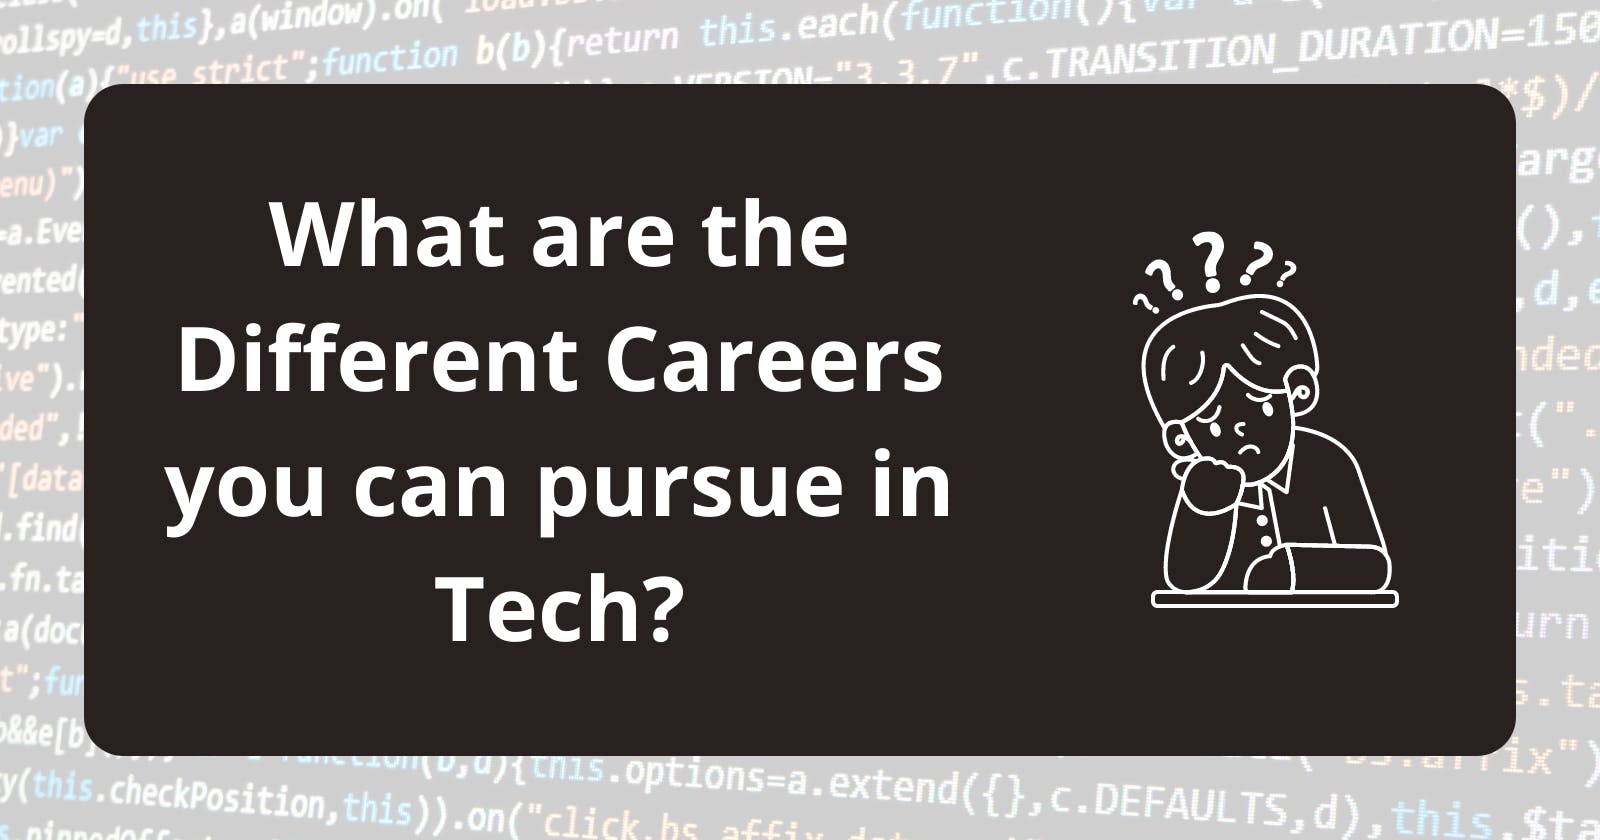 What are the different careers you can pursue in Tech?